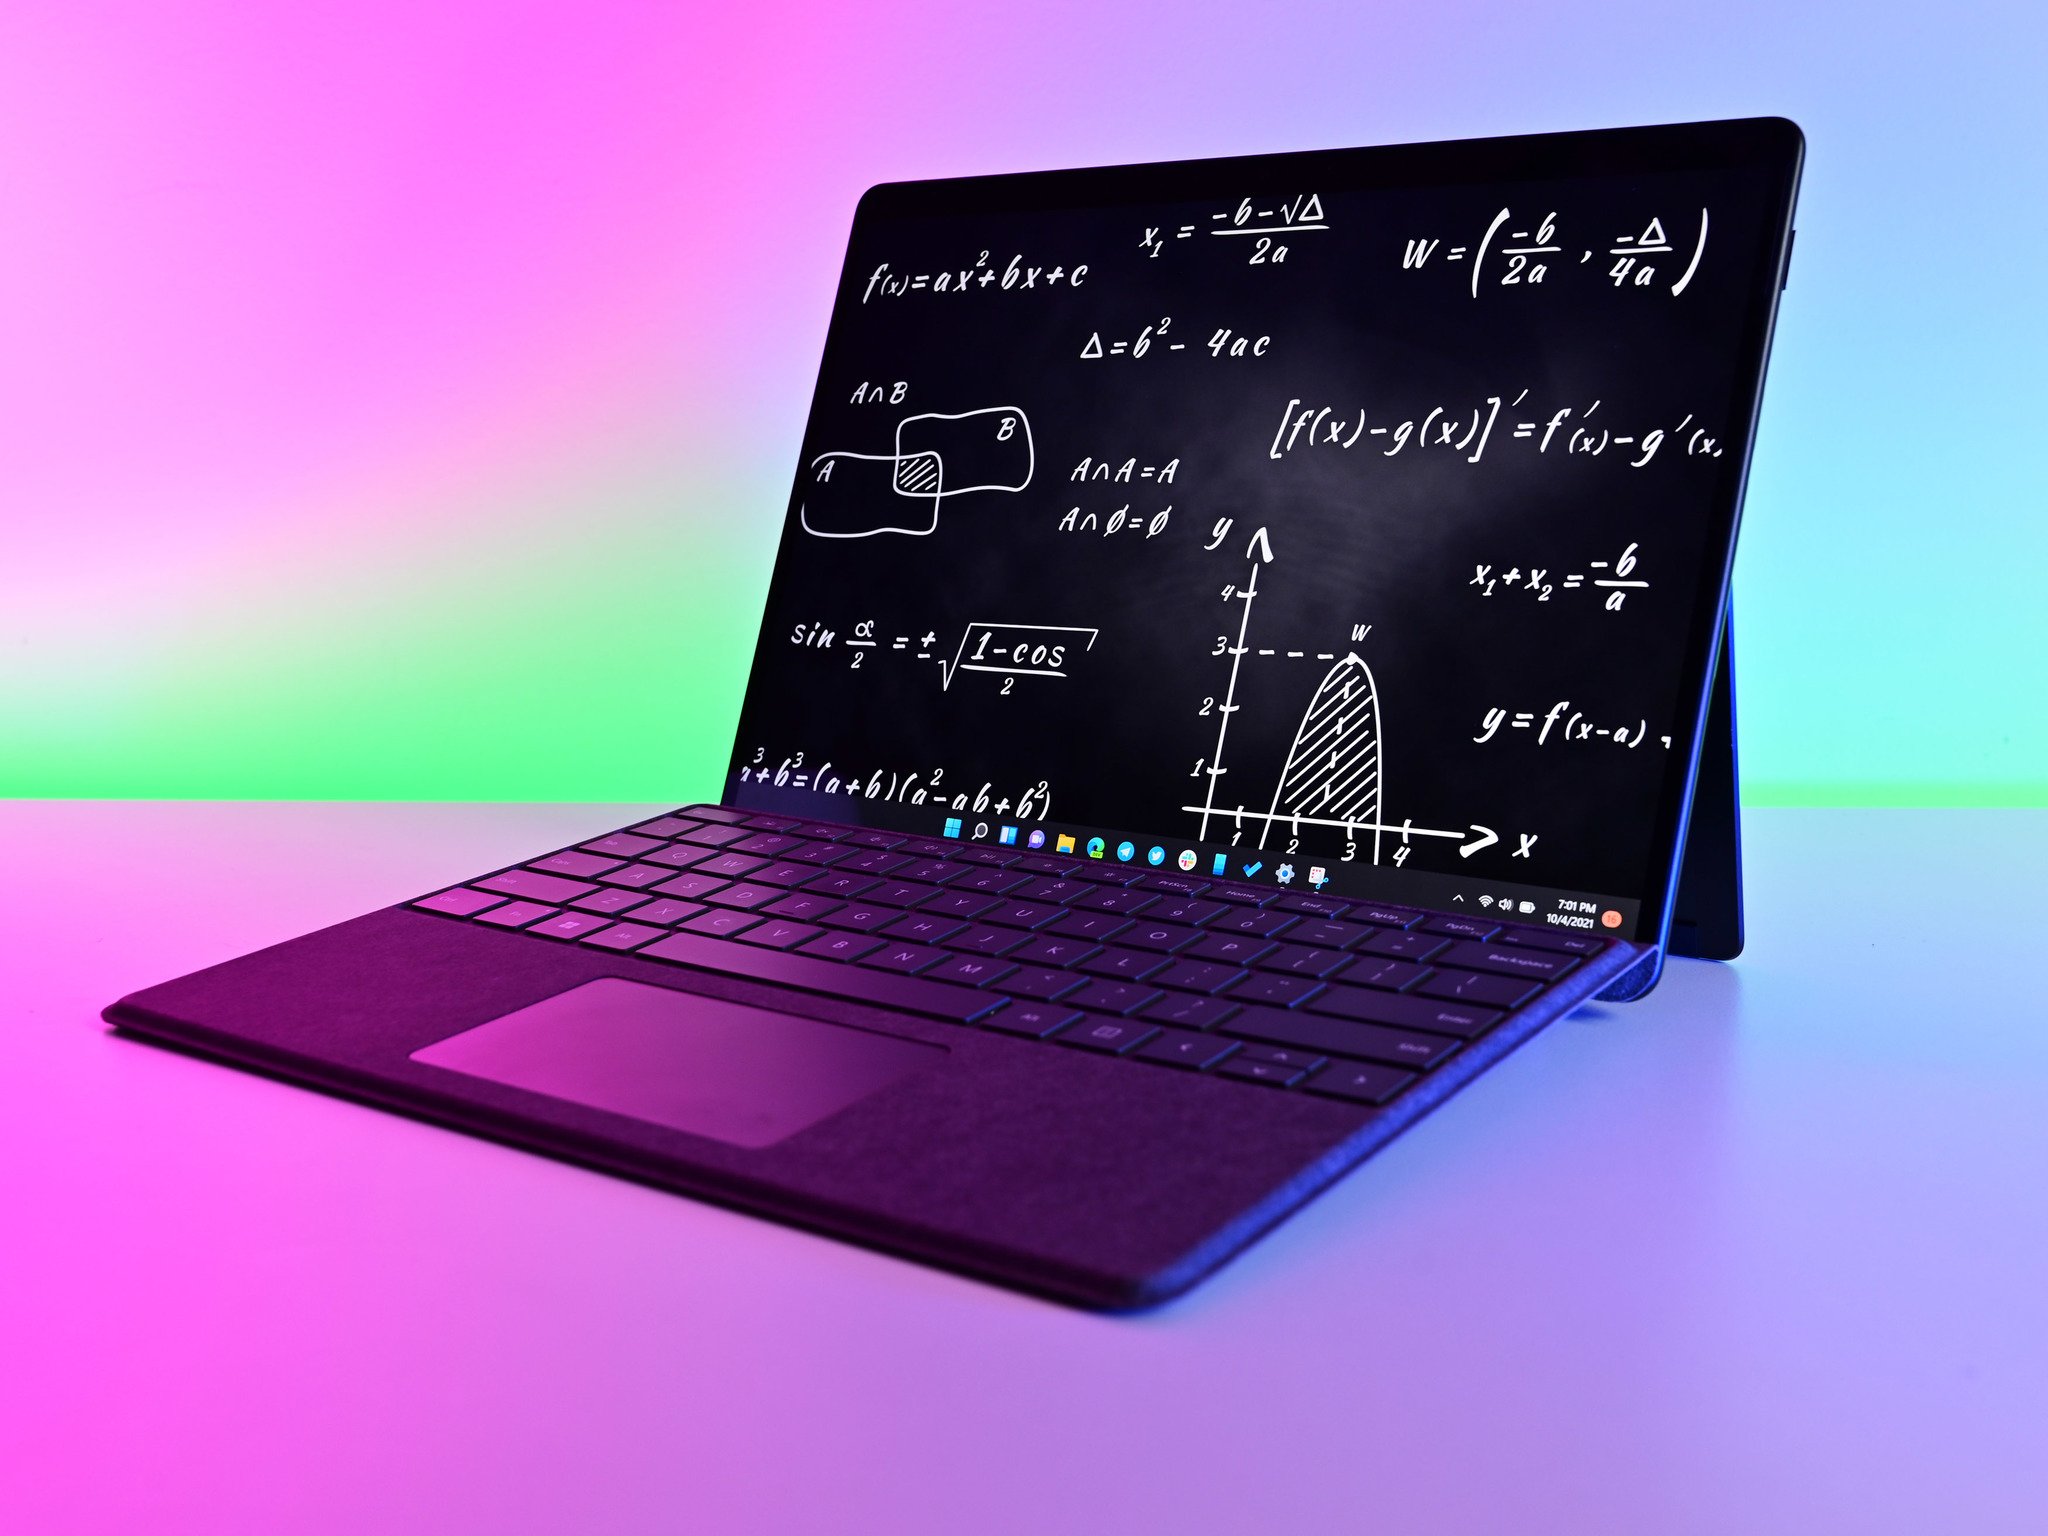 Surface Pro 8 review: Nearly 10 years in the making, Microsoft